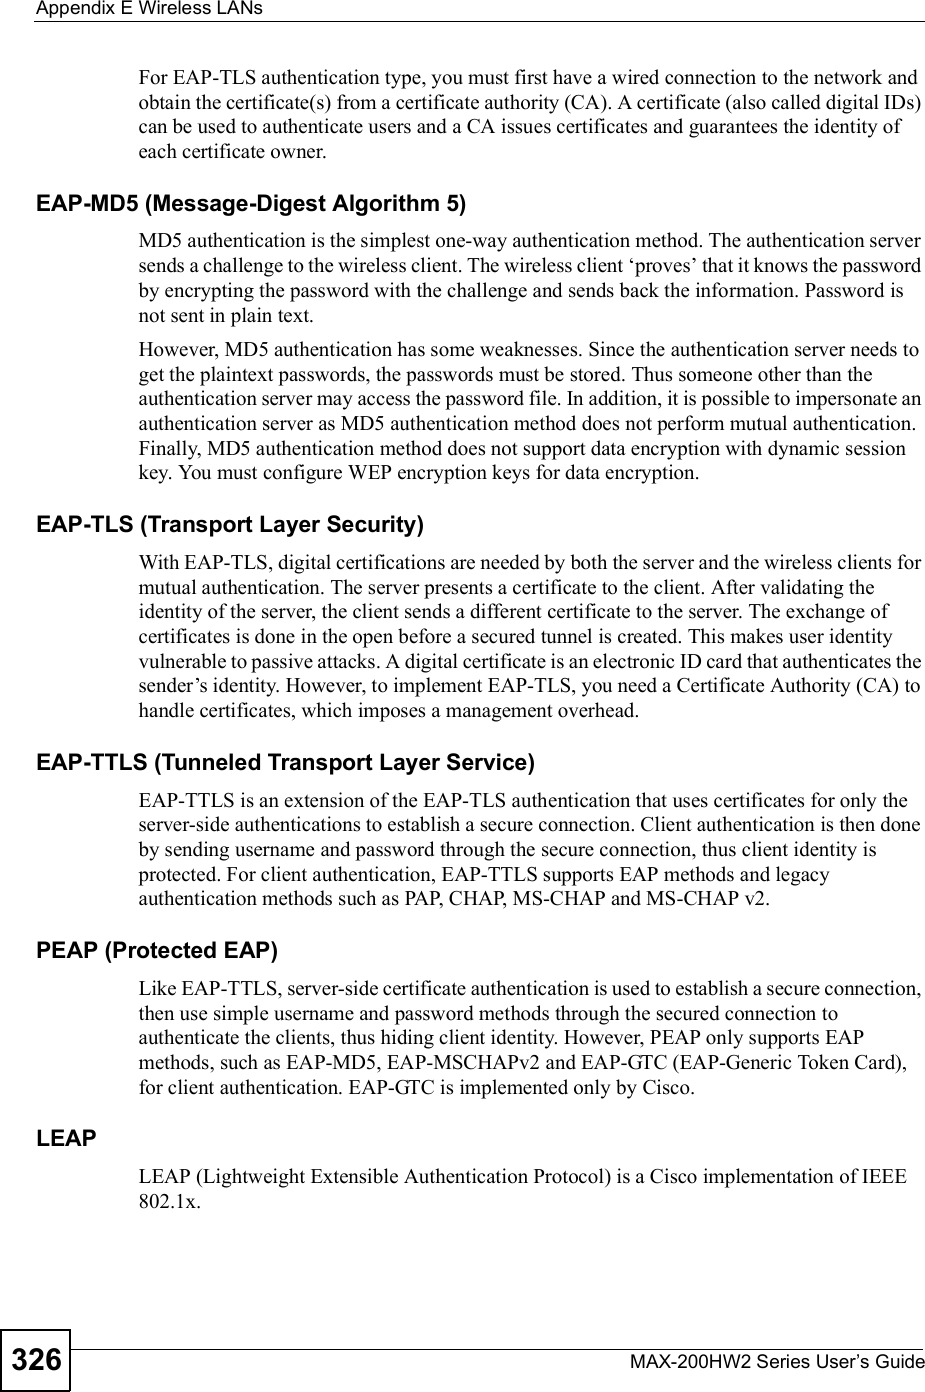 Appendix EWireless LANsMAX-200HW2 Series User s Guide326For EAP-TLS authentication type, you must first have a wired connection to the network and obtain the certificate(s) from a certificate authority (CA). A certificate (also called digital IDs) can be used to authenticate users and a CA issues certificates and guarantees the identity of each certificate owner.EAP-MD5 (Message-Digest Algorithm 5)MD5 authentication is the simplest one-way authentication method. The authentication server sends a challenge to the wireless client. The wireless client $proves! that it knows the password by encrypting the password with the challenge and sends back the information. Password is not sent in plain text. However, MD5 authentication has some weaknesses. Since the authentication server needs to get the plaintext passwords, the passwords must be stored. Thus someone other than the authentication server may access the password file. In addition, it is possible to impersonate an authentication server as MD5 authentication method does not perform mutual authentication. Finally, MD5 authentication method does not support data encryption with dynamic session key. You must configure WEP encryption keys for data encryption. EAP-TLS (Transport Layer Security)With EAP-TLS, digital certifications are needed by both the server and the wireless clients for mutual authentication. The server presents a certificate to the client. After validating the identity of the server, the client sends a different certificate to the server. The exchange of certificates is done in the open before a secured tunnel is created. This makes user identity vulnerable to passive attacks. A digital certificate is an electronic ID card that authenticates the sender!s identity. However, to implement EAP-TLS, you need a Certificate Authority (CA) to handle certificates, which imposes a management overhead. EAP-TTLS (Tunneled Transport Layer Service) EAP-TTLS is an extension of the EAP-TLS authentication that uses certificates for only the server-side authentications to establish a secure connection. Client authentication is then done by sending username and password through the secure connection, thus client identity is protected. For client authentication, EAP-TTLS supports EAP methods and legacy authentication methods such as PAP, CHAP, MS-CHAP and MS-CHAP v2. PEAP (Protected EAP)Like EAP-TTLS, server-side certificate authentication is used to establish a secure connection, then use simple username and password methods through the secured connection to authenticate the clients, thus hiding client identity. However, PEAP only supports EAP methods, such as EAP-MD5, EAP-MSCHAPv2 and EAP-GTC (EAP-Generic Token Card), for client authentication. EAP-GTC is implemented only by Cisco.LEAPLEAP (Lightweight Extensible Authentication Protocol) is a Cisco implementation of IEEE 802.1x. 